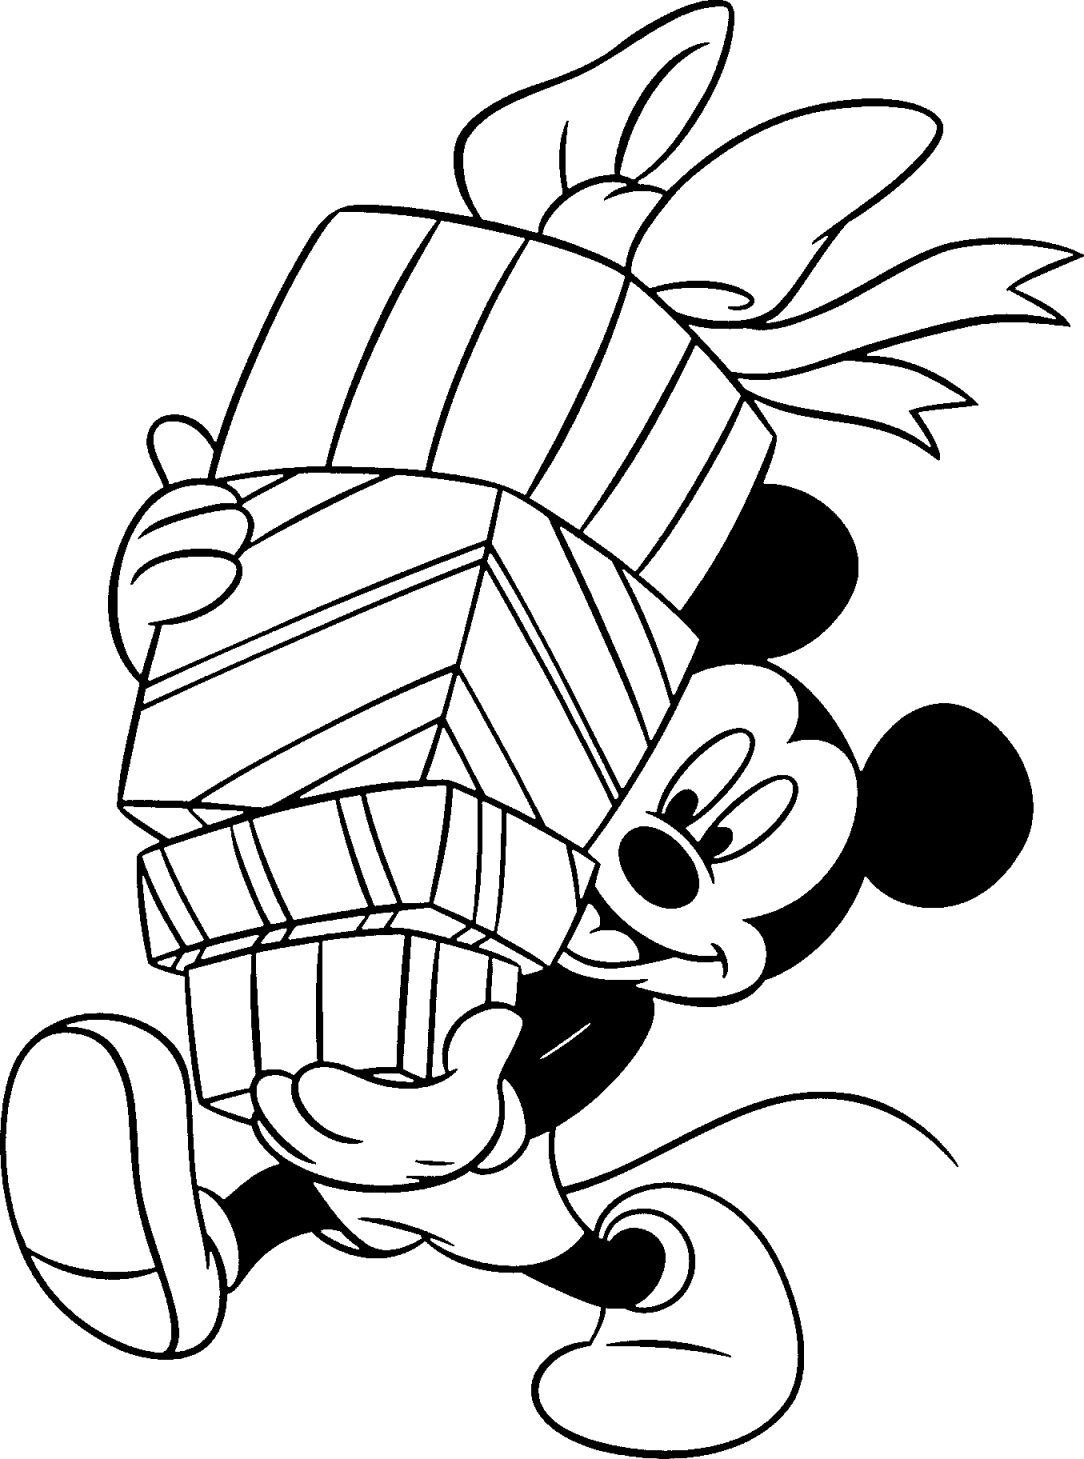 Download Coloring Pages Christmas Disney >> Disney Coloring Pages